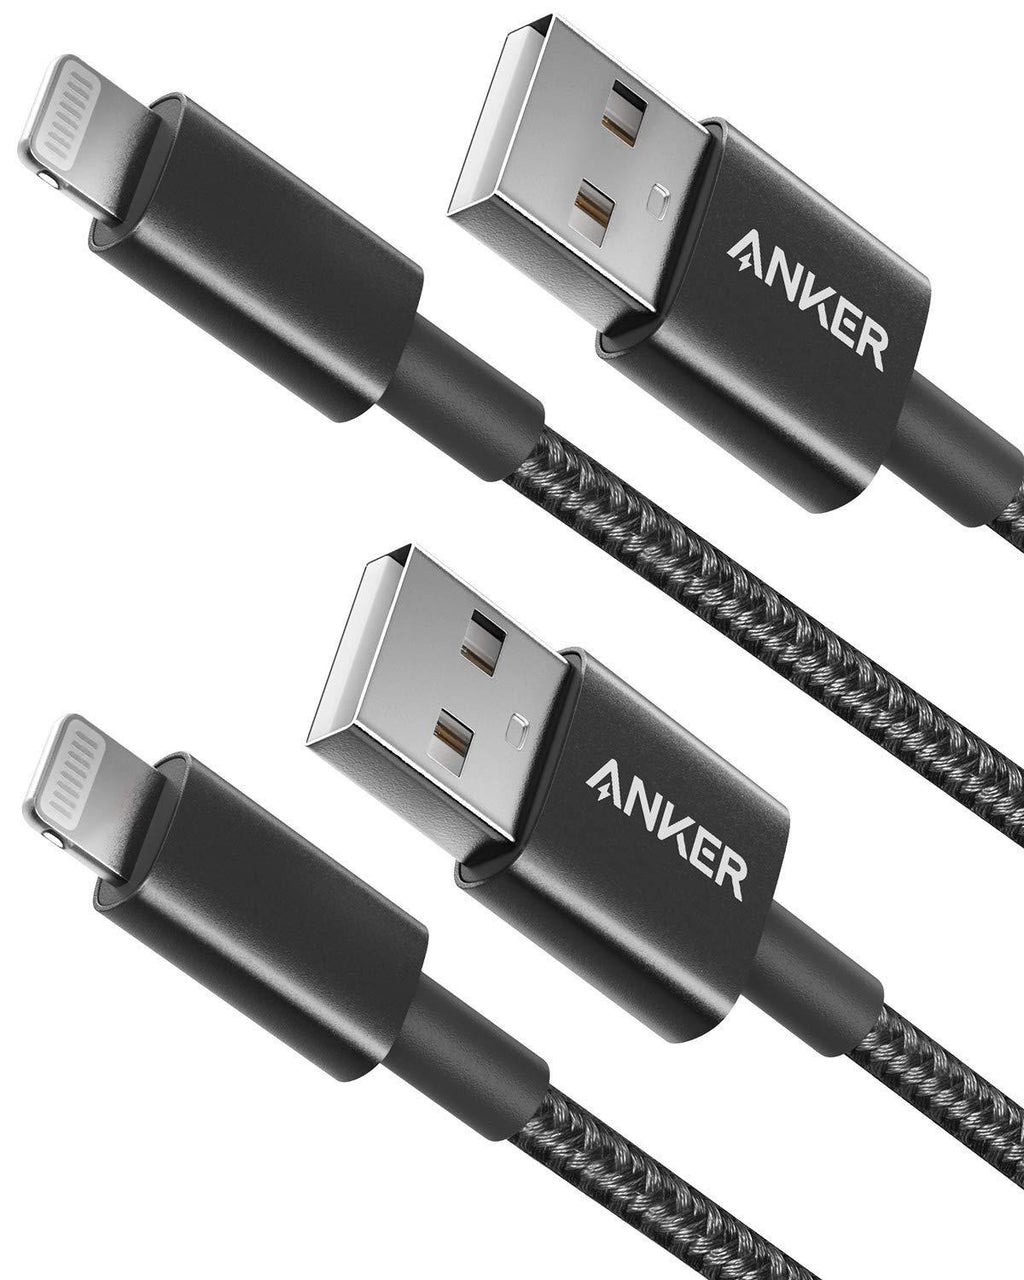 Anker 6ft Premium Nylon Lightning Cable [2-Pack], MFi Certified for iPhone Chargers, iPhone SE/Xs/XS Max/XR/X / 8 Plus / 7/6 Plus, iPad Pro Air 2, and More(Black) Black